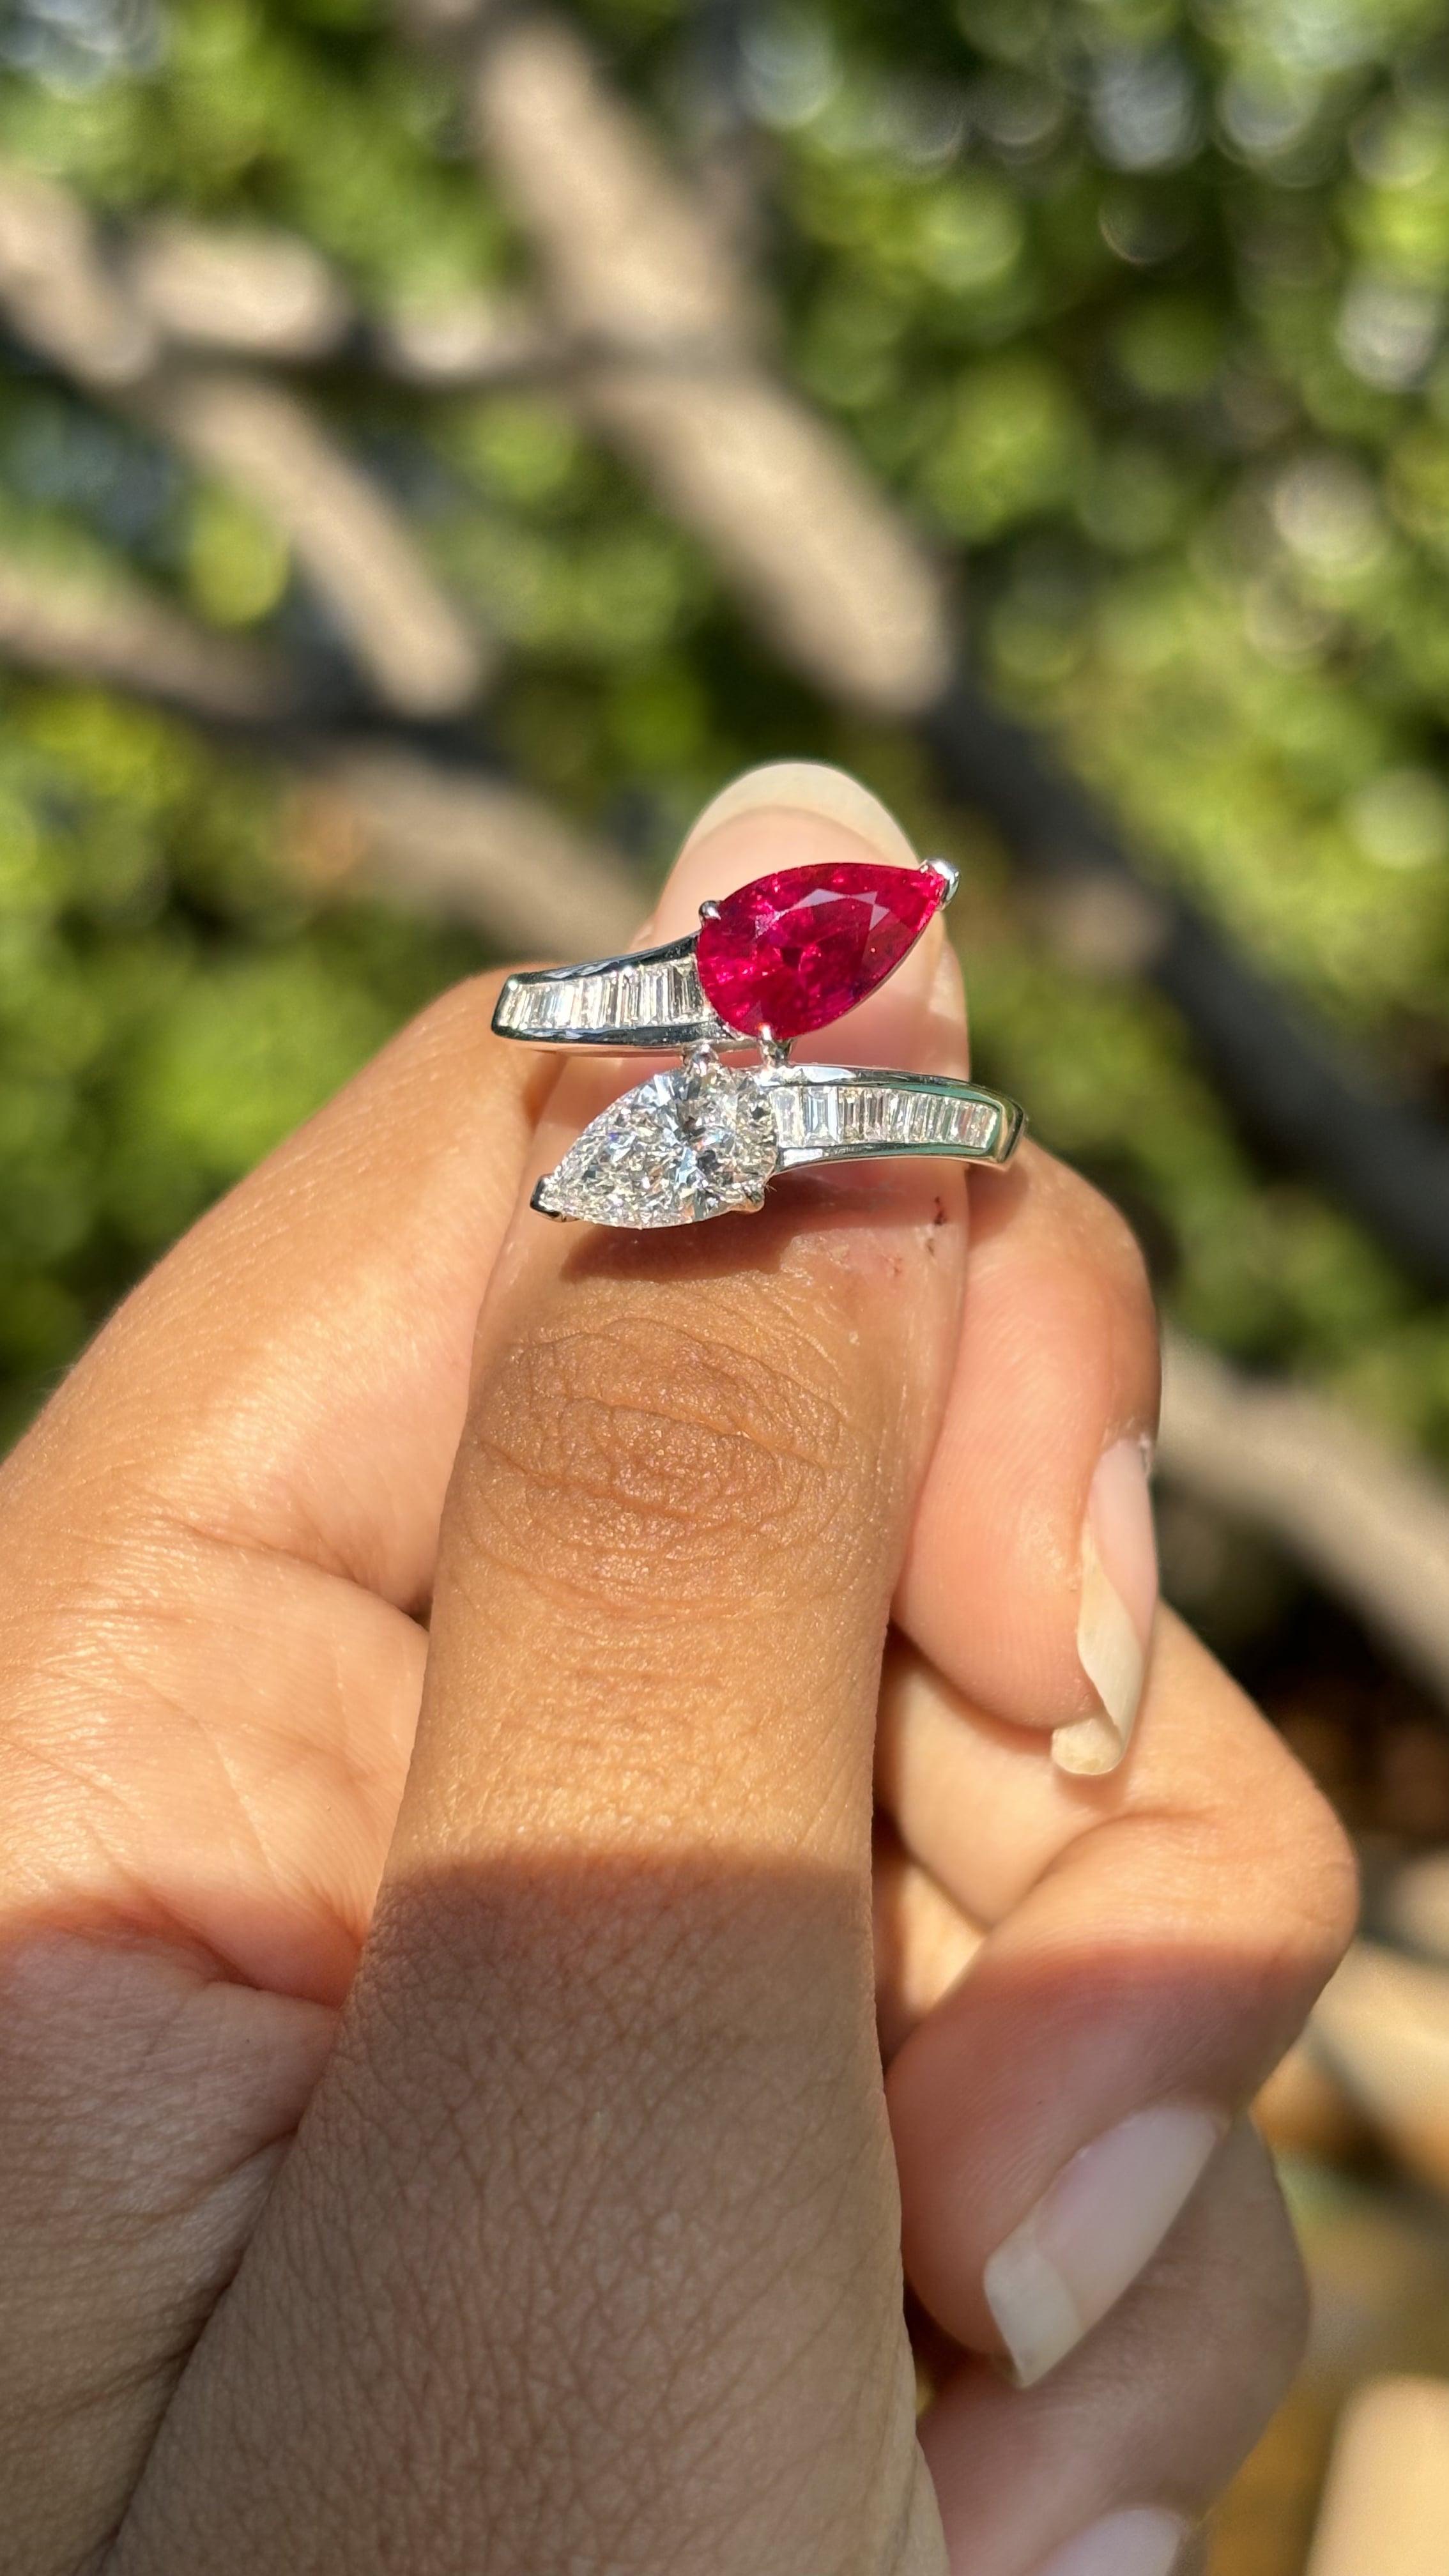 Introducing our exquisite Toi Et Moi Ring, a masterfully crafted symbol of timeless elegance and sophistication. This captivating piece features a stunning 2.07 Carat pear-shaped Burma, renowned for its rich, pigeon blood hue and exceptional luster.